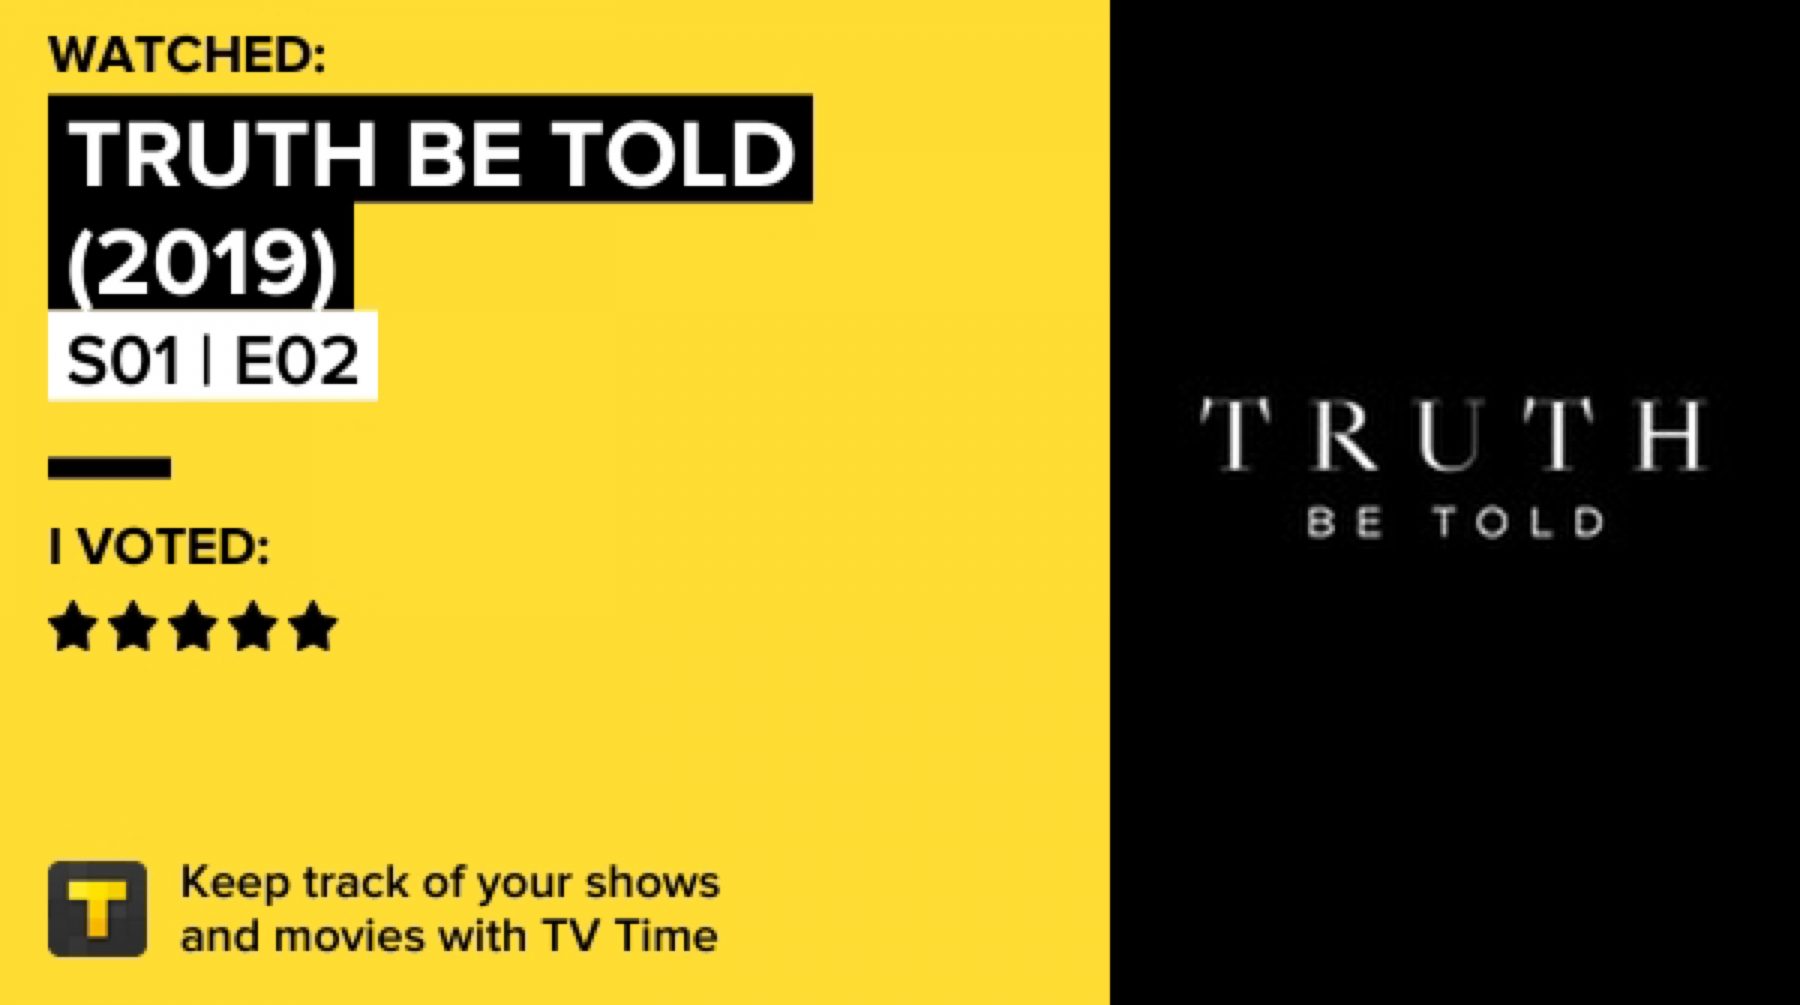 Watched Truth Be Told (2019) Season 1 Episode 2 :"Black People in the Neighborhood”